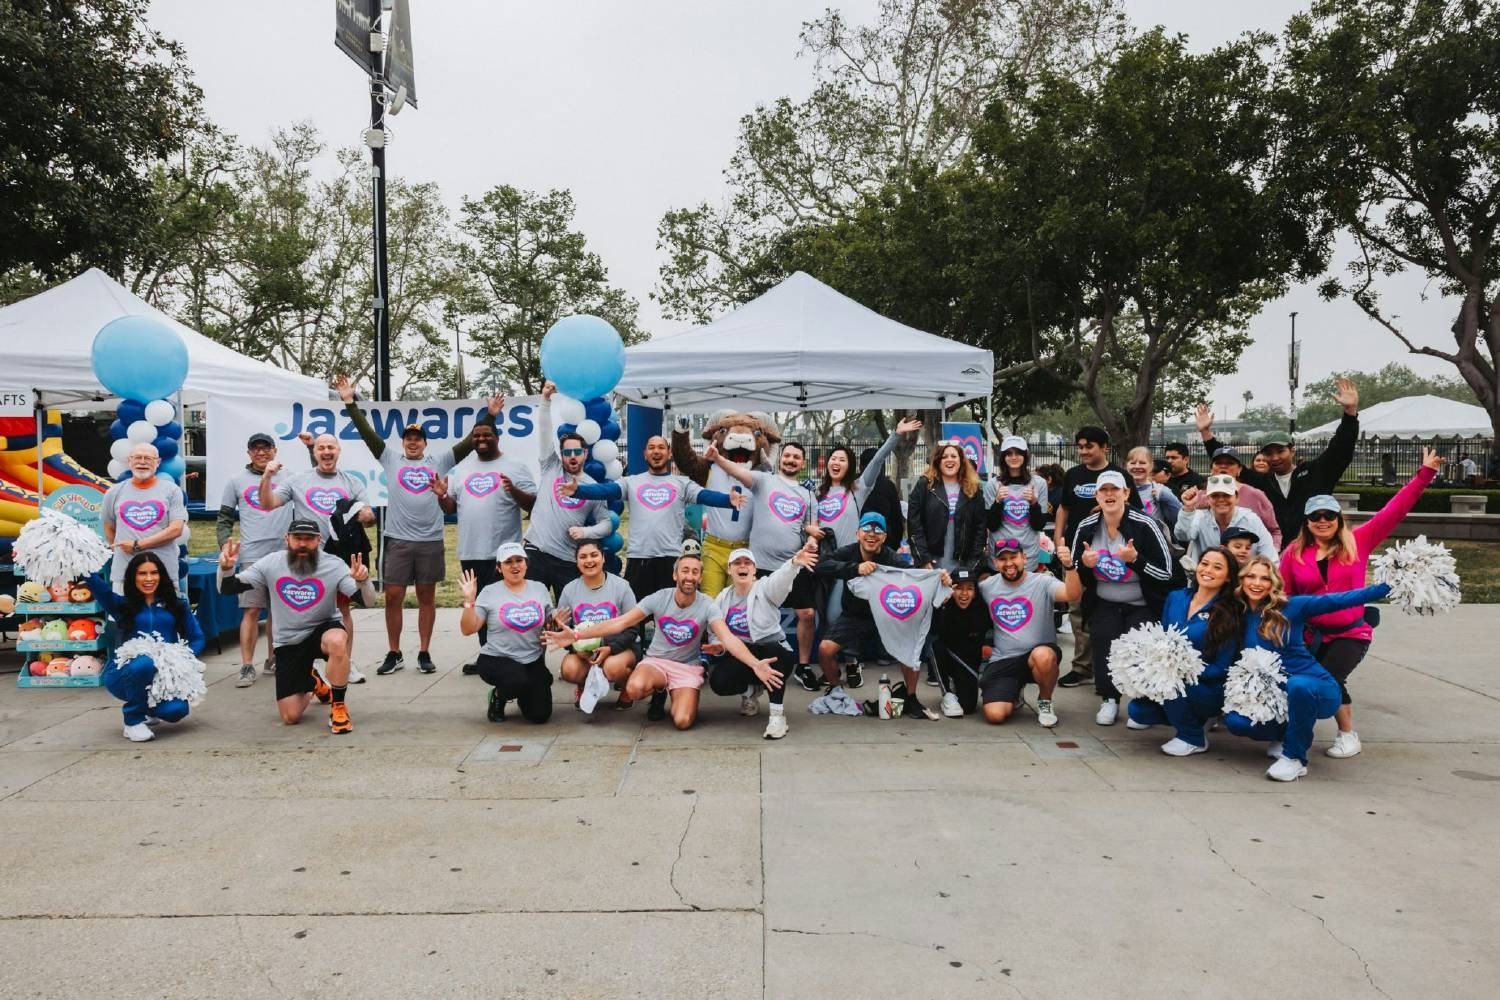 Jazwares sponsored the Make-A-Wish Walk for Wishes in Los Angeles, California